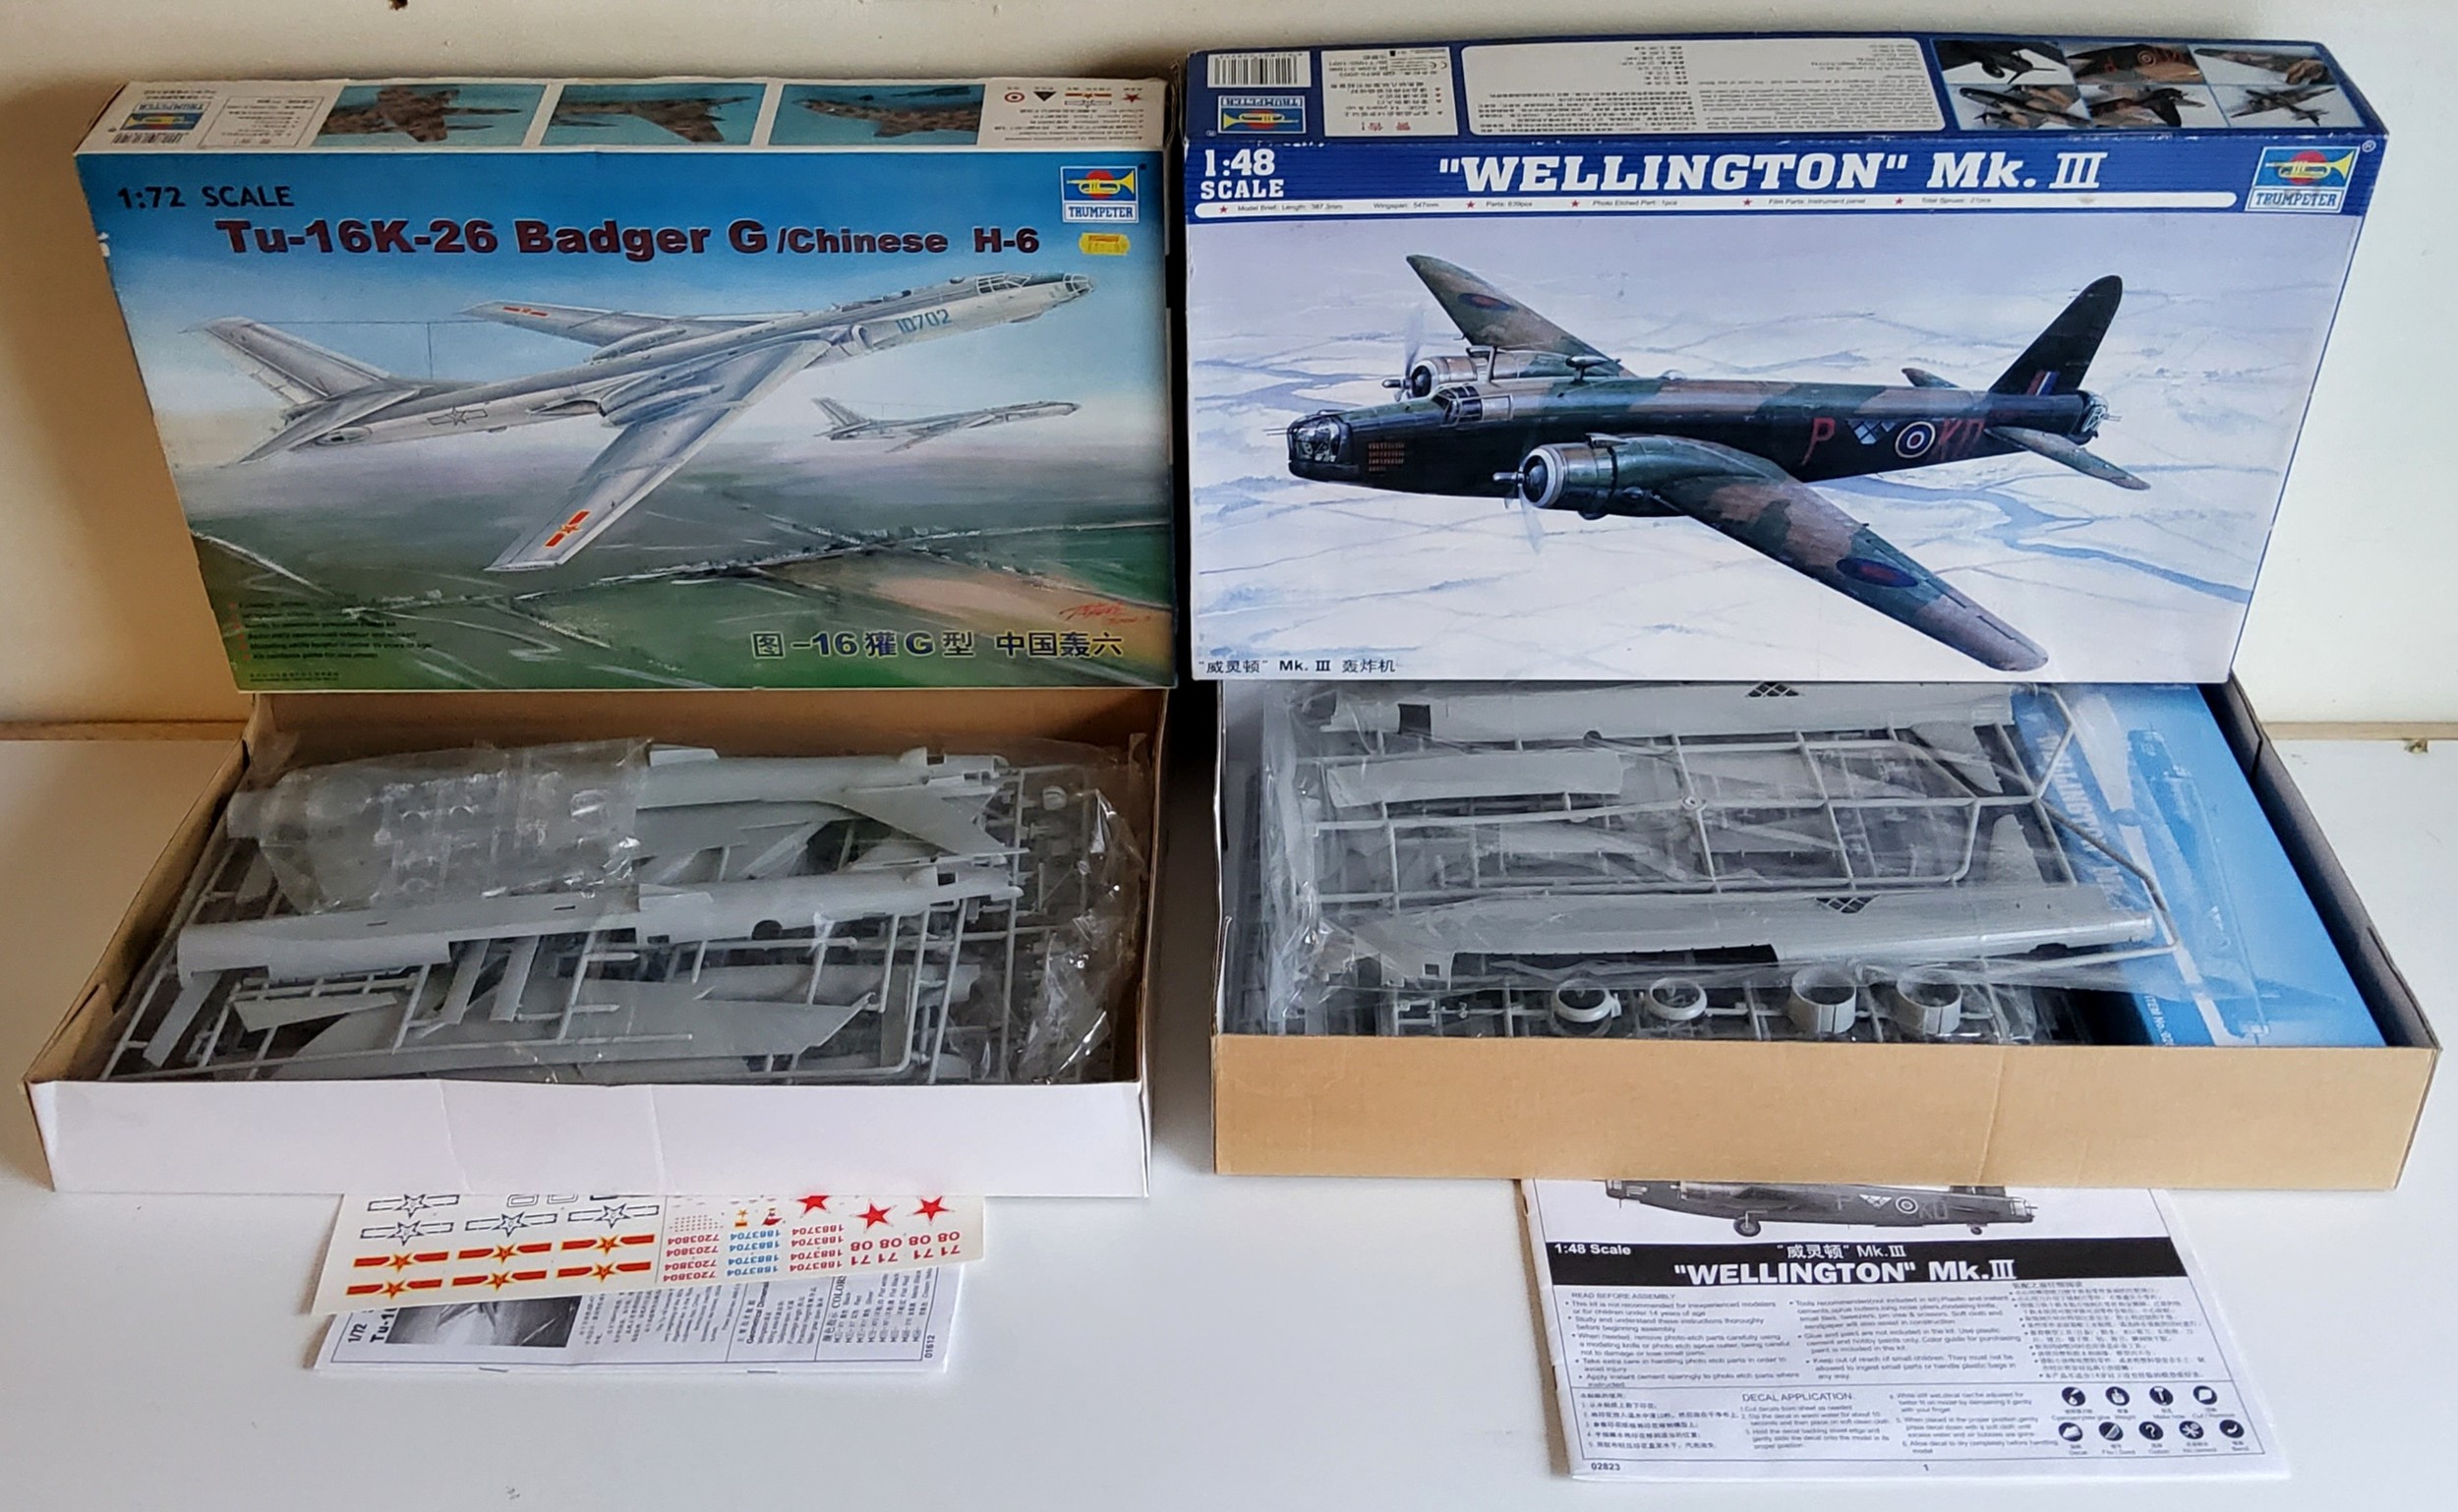 A Boxed Trumpeter 02823 1/48 Scale "Wellington" Mk III Aircraft Kit; a 01612 1:72 scale Tu-16k-26 - Image 2 of 2